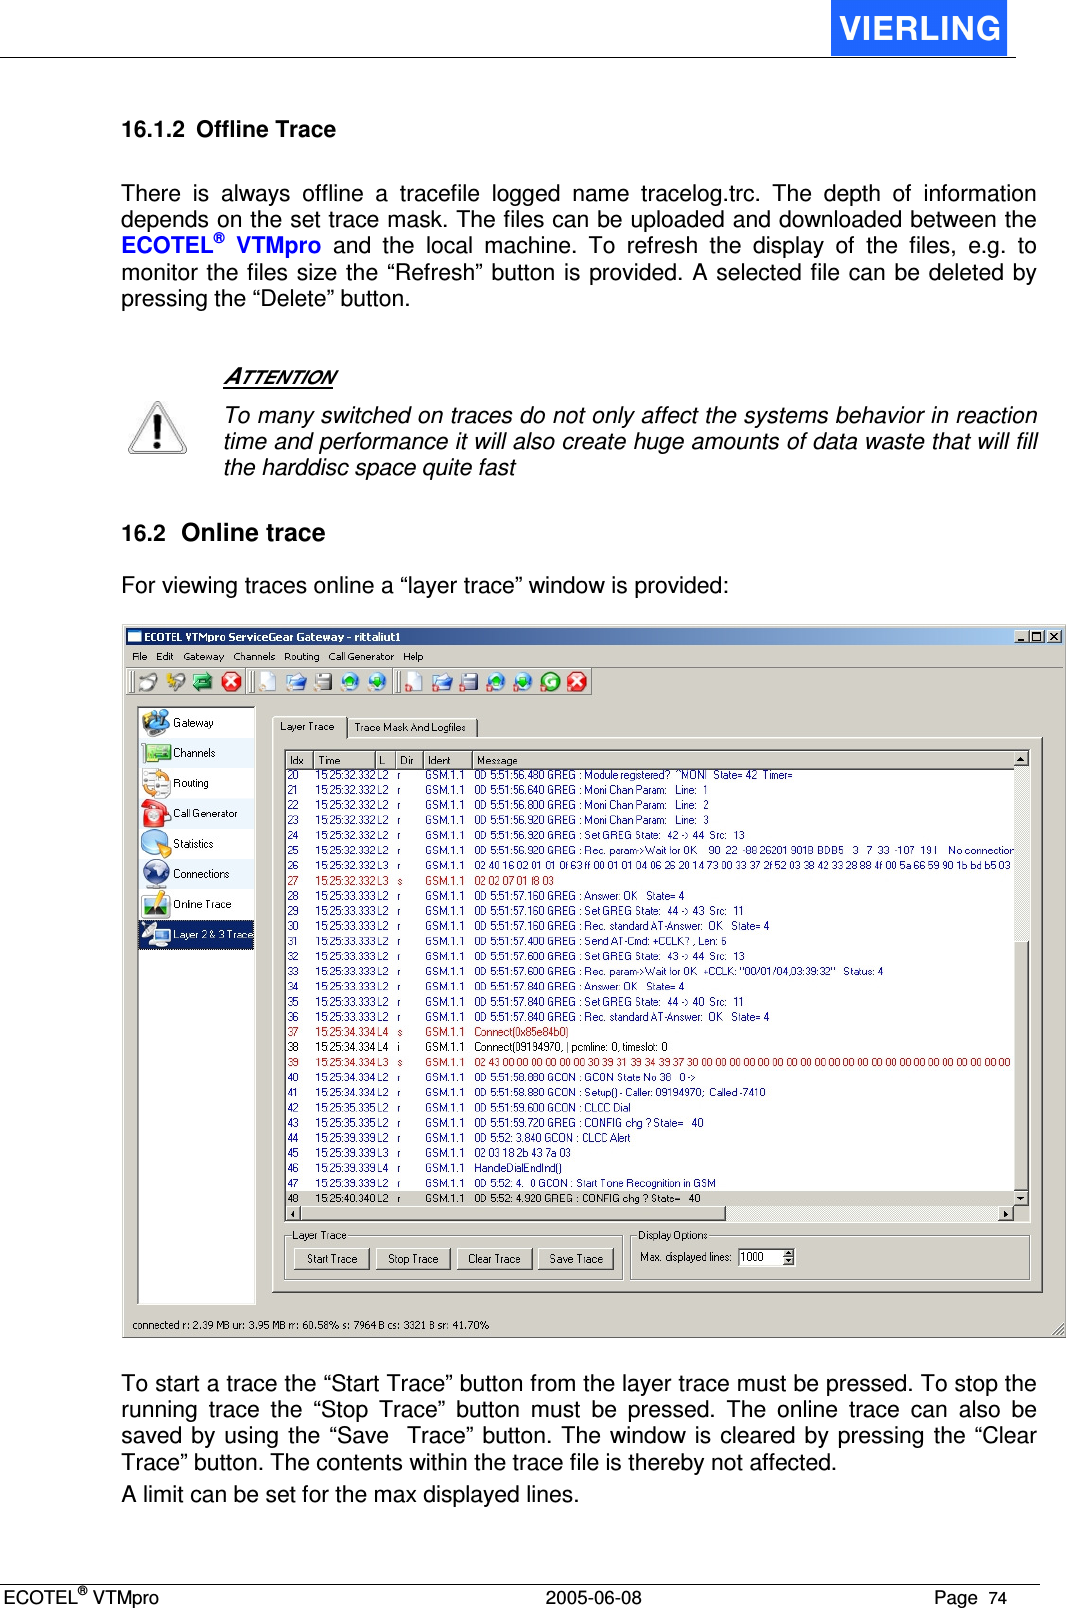 ECOTEL® VTMpro  2005-06-08 Page  74    16.1.2  Offline Trace There  is  always  offline  a  tracefile  logged  name  tracelog.trc.  The  depth  of  information depends on the set trace mask. The files can be uploaded and downloaded between the ECOTEL®  VTMpro  and  the  local  machine.  To  refresh  the  display  of  the  files,  e.g.  to monitor the files size the “Refresh” button is provided. A selected file can be deleted by pressing the “Delete” button.    ATTENTION  To many switched on traces do not only affect the systems behavior in reaction time and performance it will also create huge amounts of data waste that will fill the harddisc space quite fast 16.2 Online trace For viewing traces online a “layer trace” window is provided:    To start a trace the “Start Trace” button from the layer trace must be pressed. To stop the running  trace  the  “Stop  Trace”  button  must  be  pressed.  The  online  trace  can  also  be saved by using the “Save  Trace” button. The window is cleared by pressing  the “Clear Trace” button. The contents within the trace file is thereby not affected. A limit can be set for the max displayed lines. 